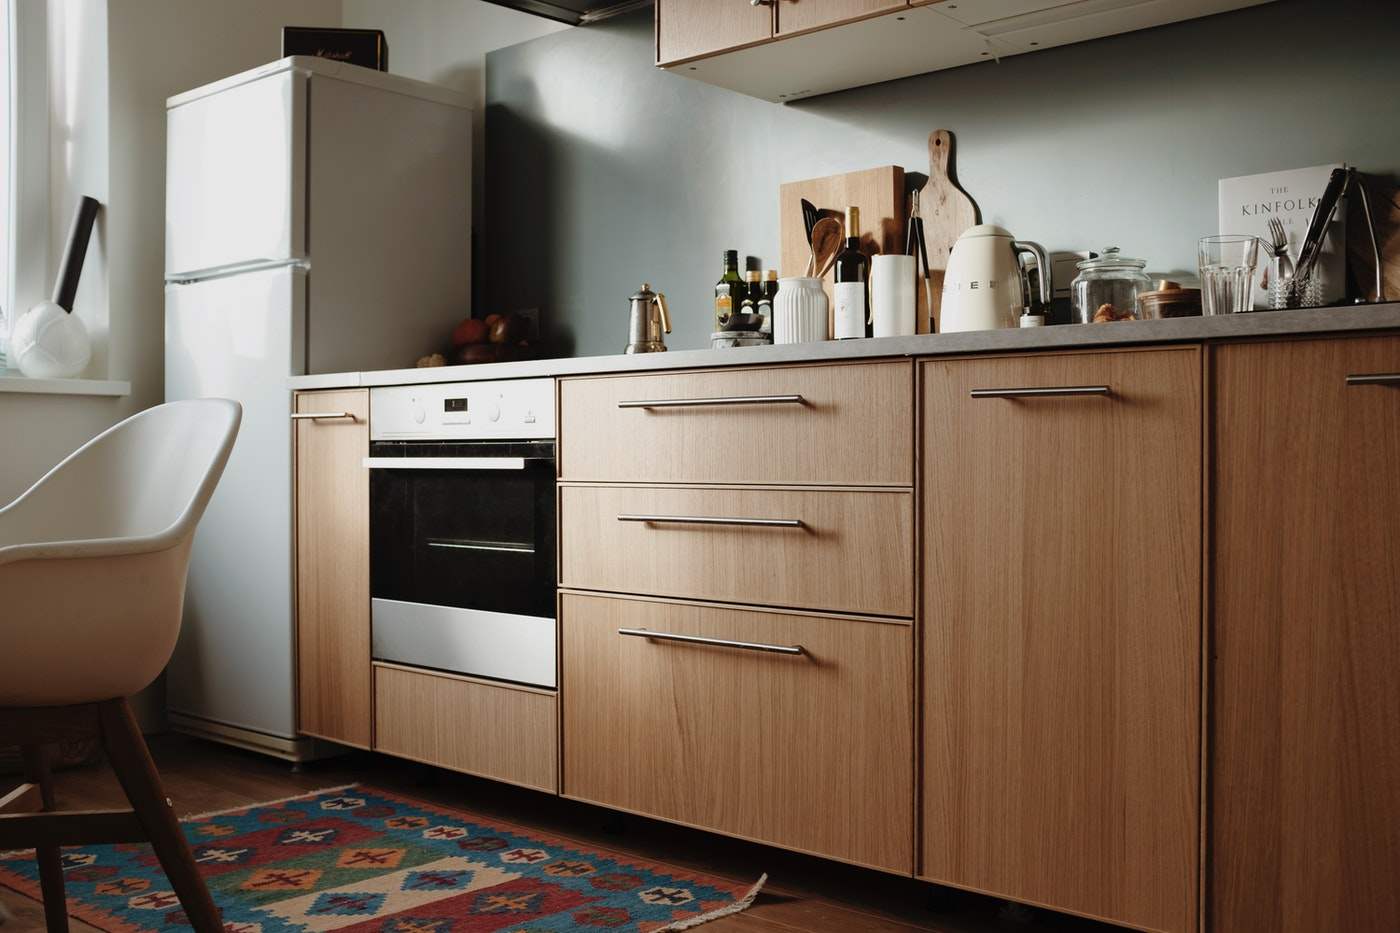 fridge and stove - how apartments are becoming more sustainable